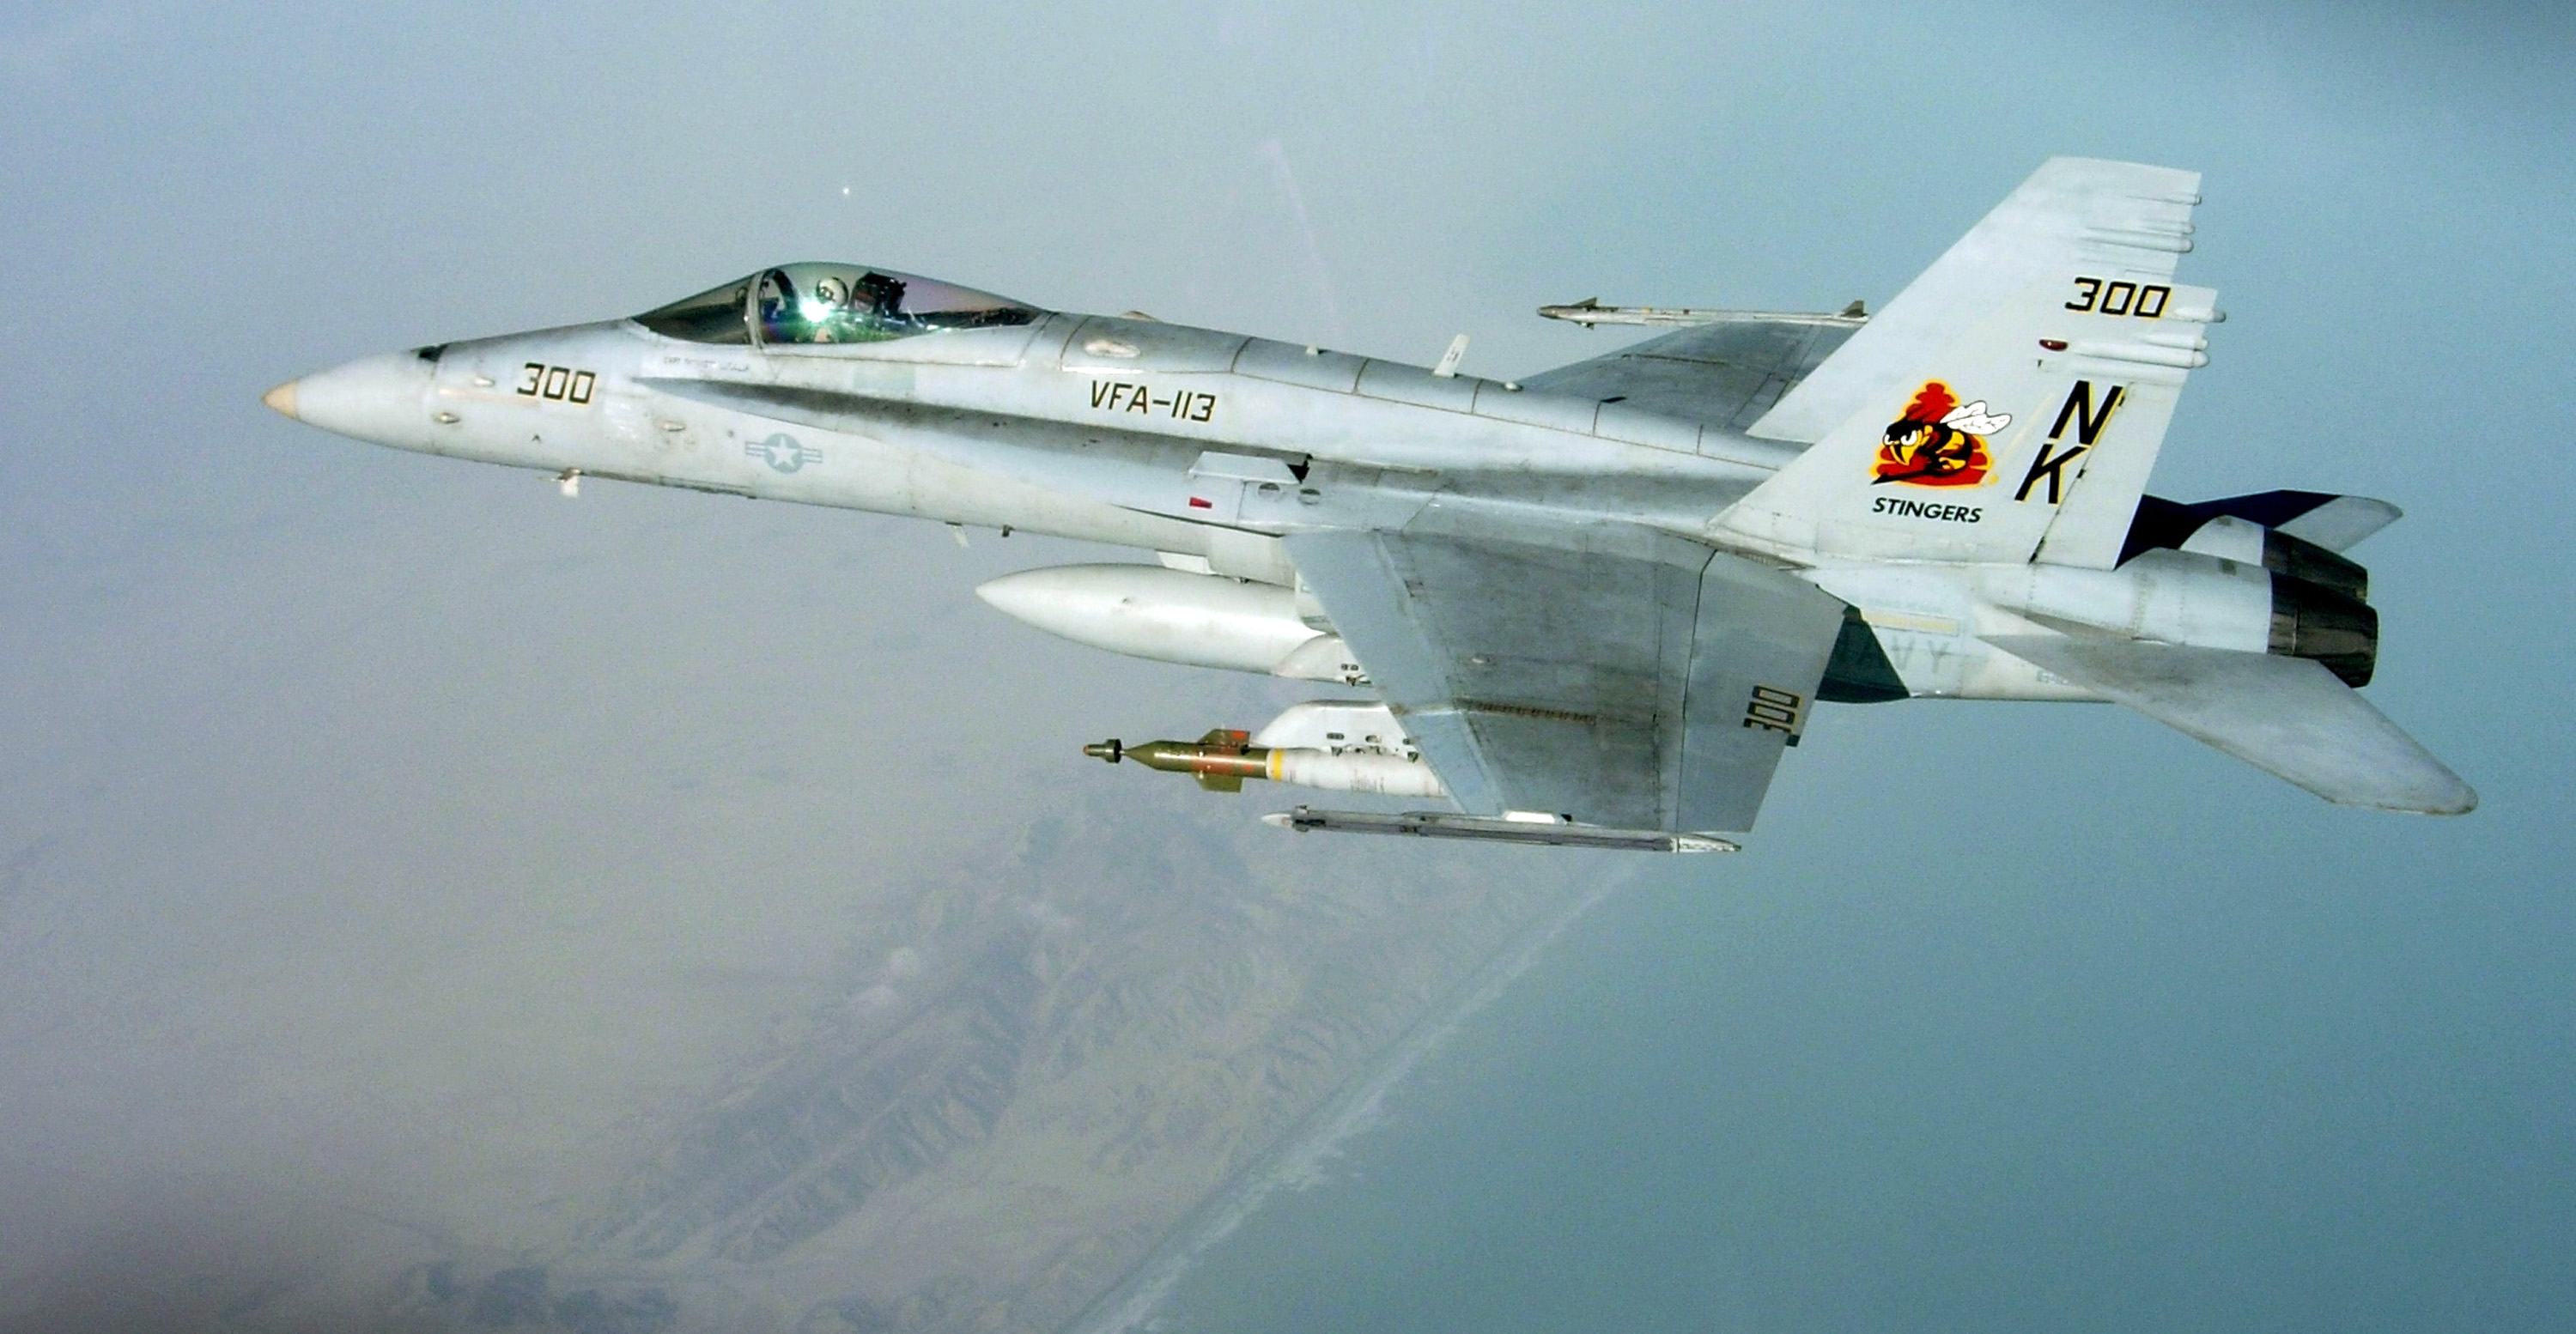 F/A-18C Hornet assigned to the "Stingers" of Strike Fighter Squadron (VFA-113) in 2009. US Navy Photo